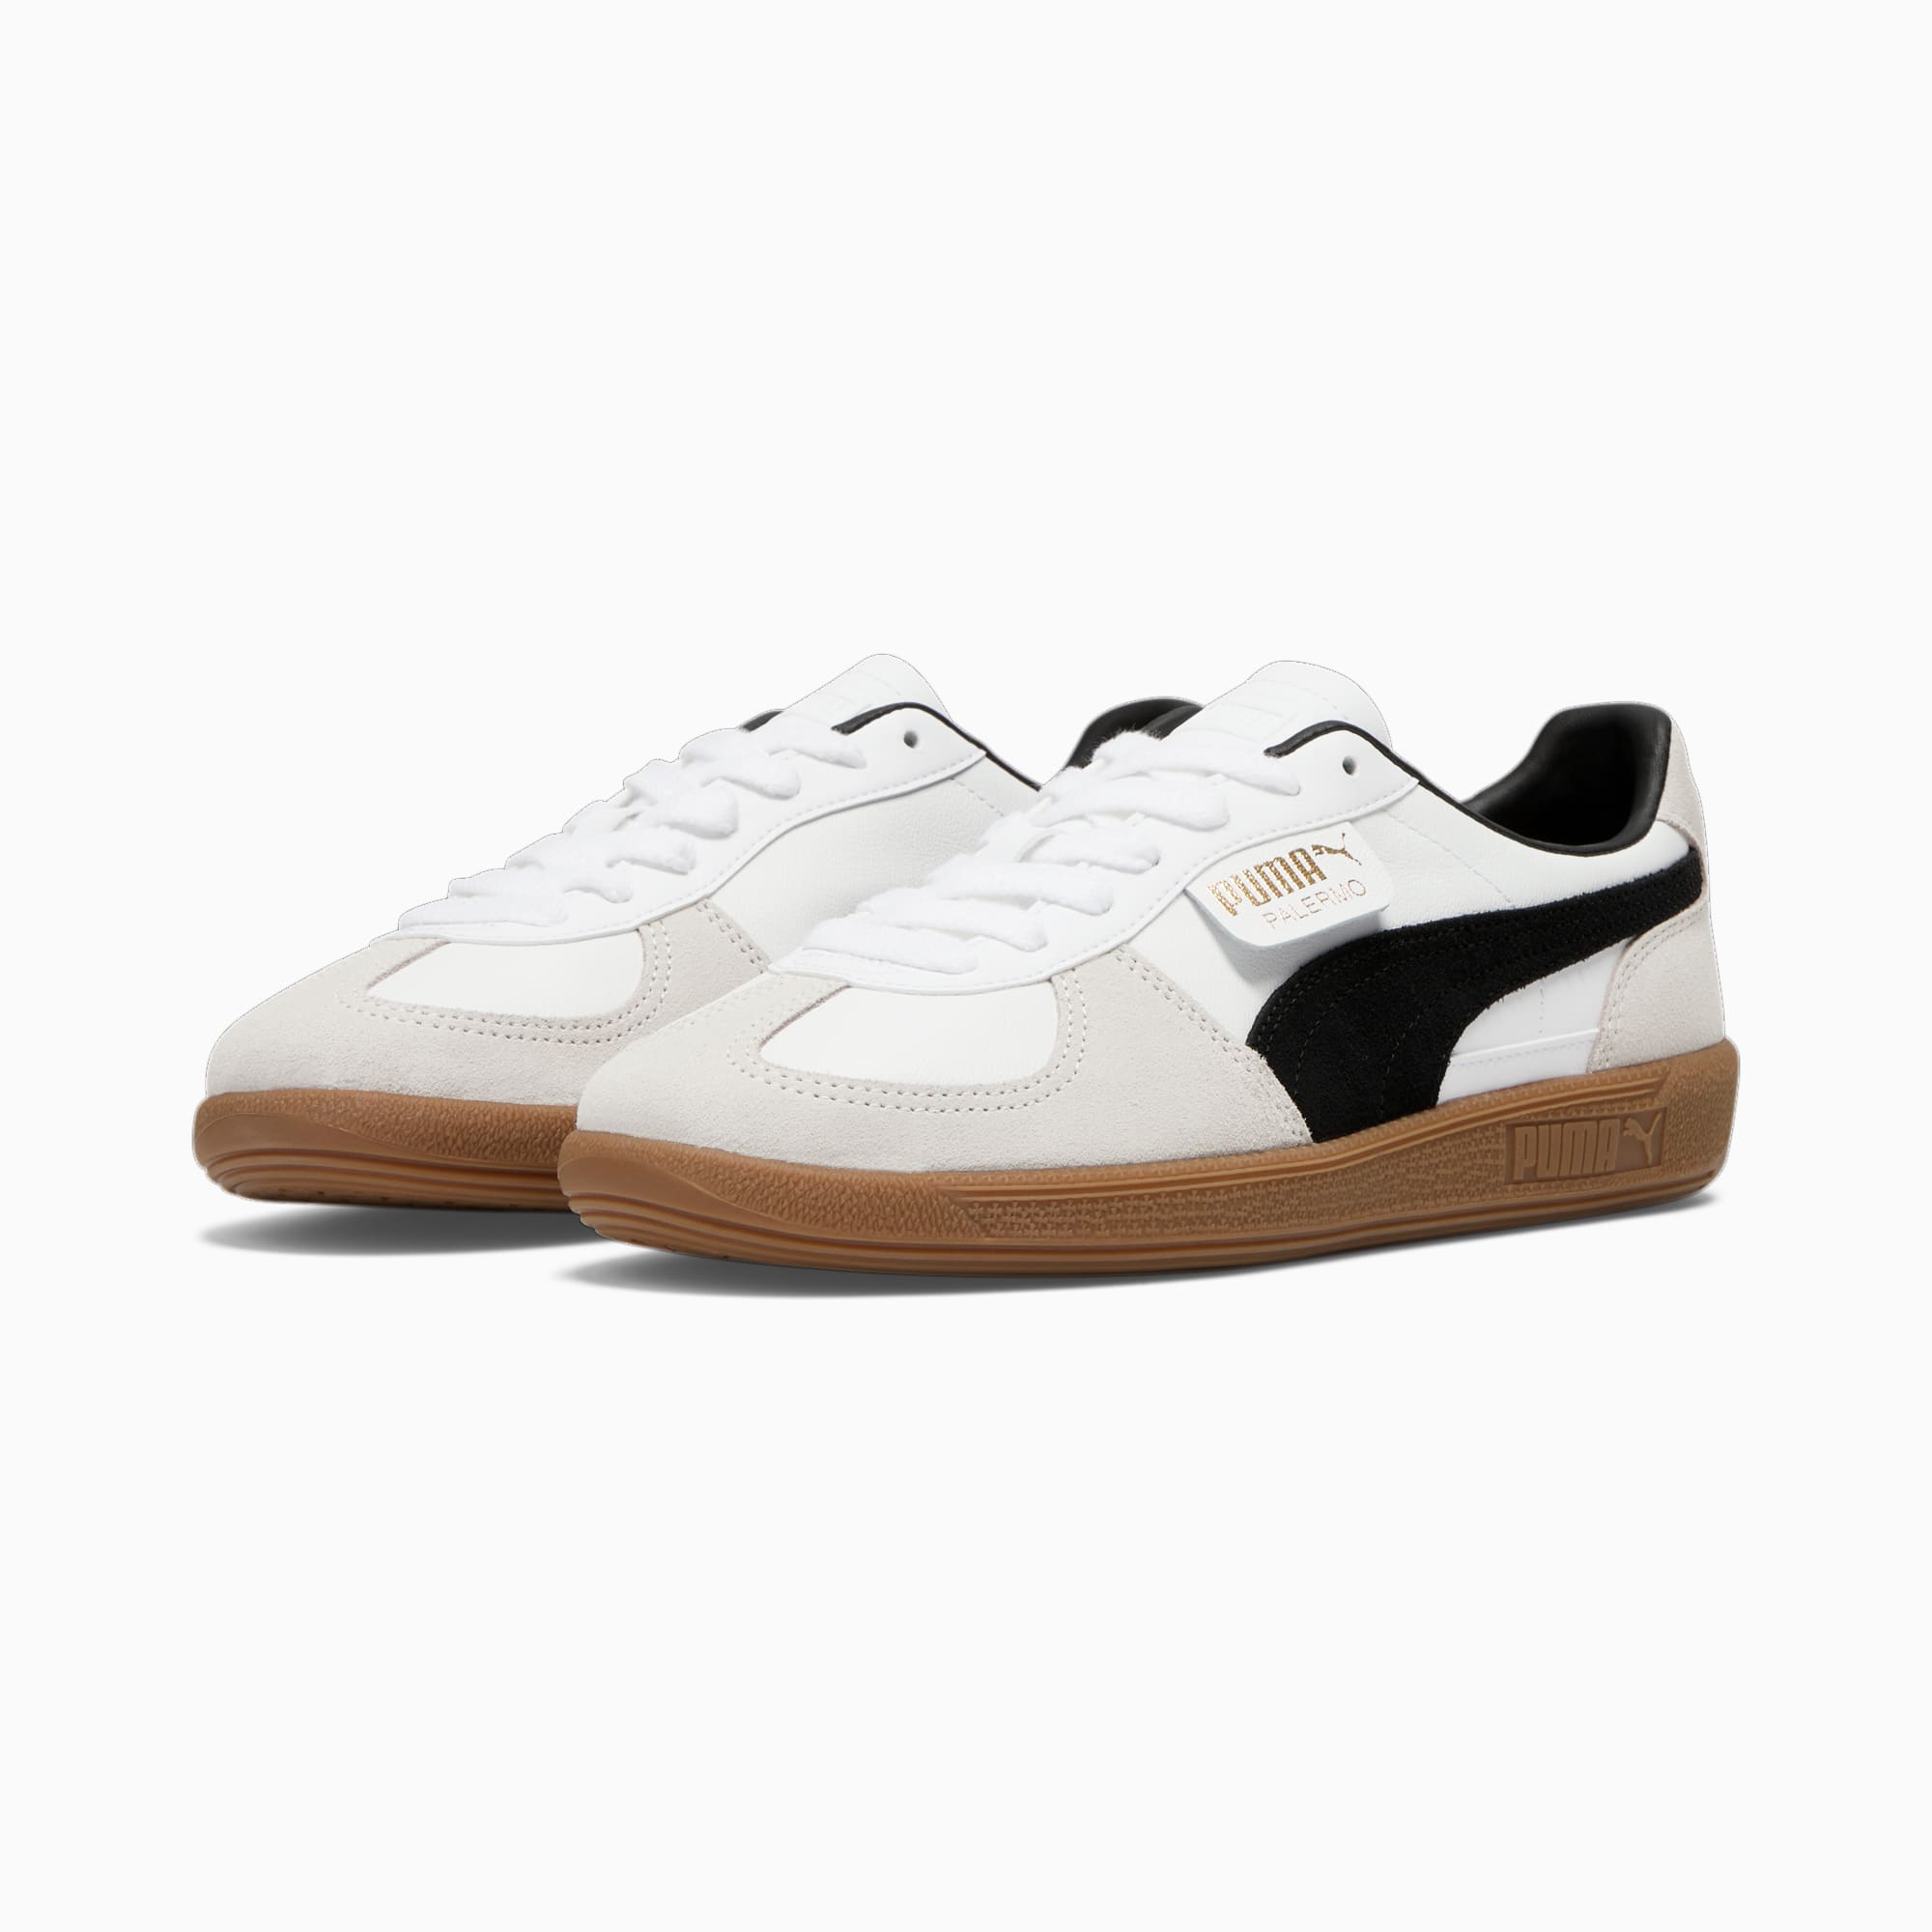 PUMA Palermo Special sneakers in White and Black